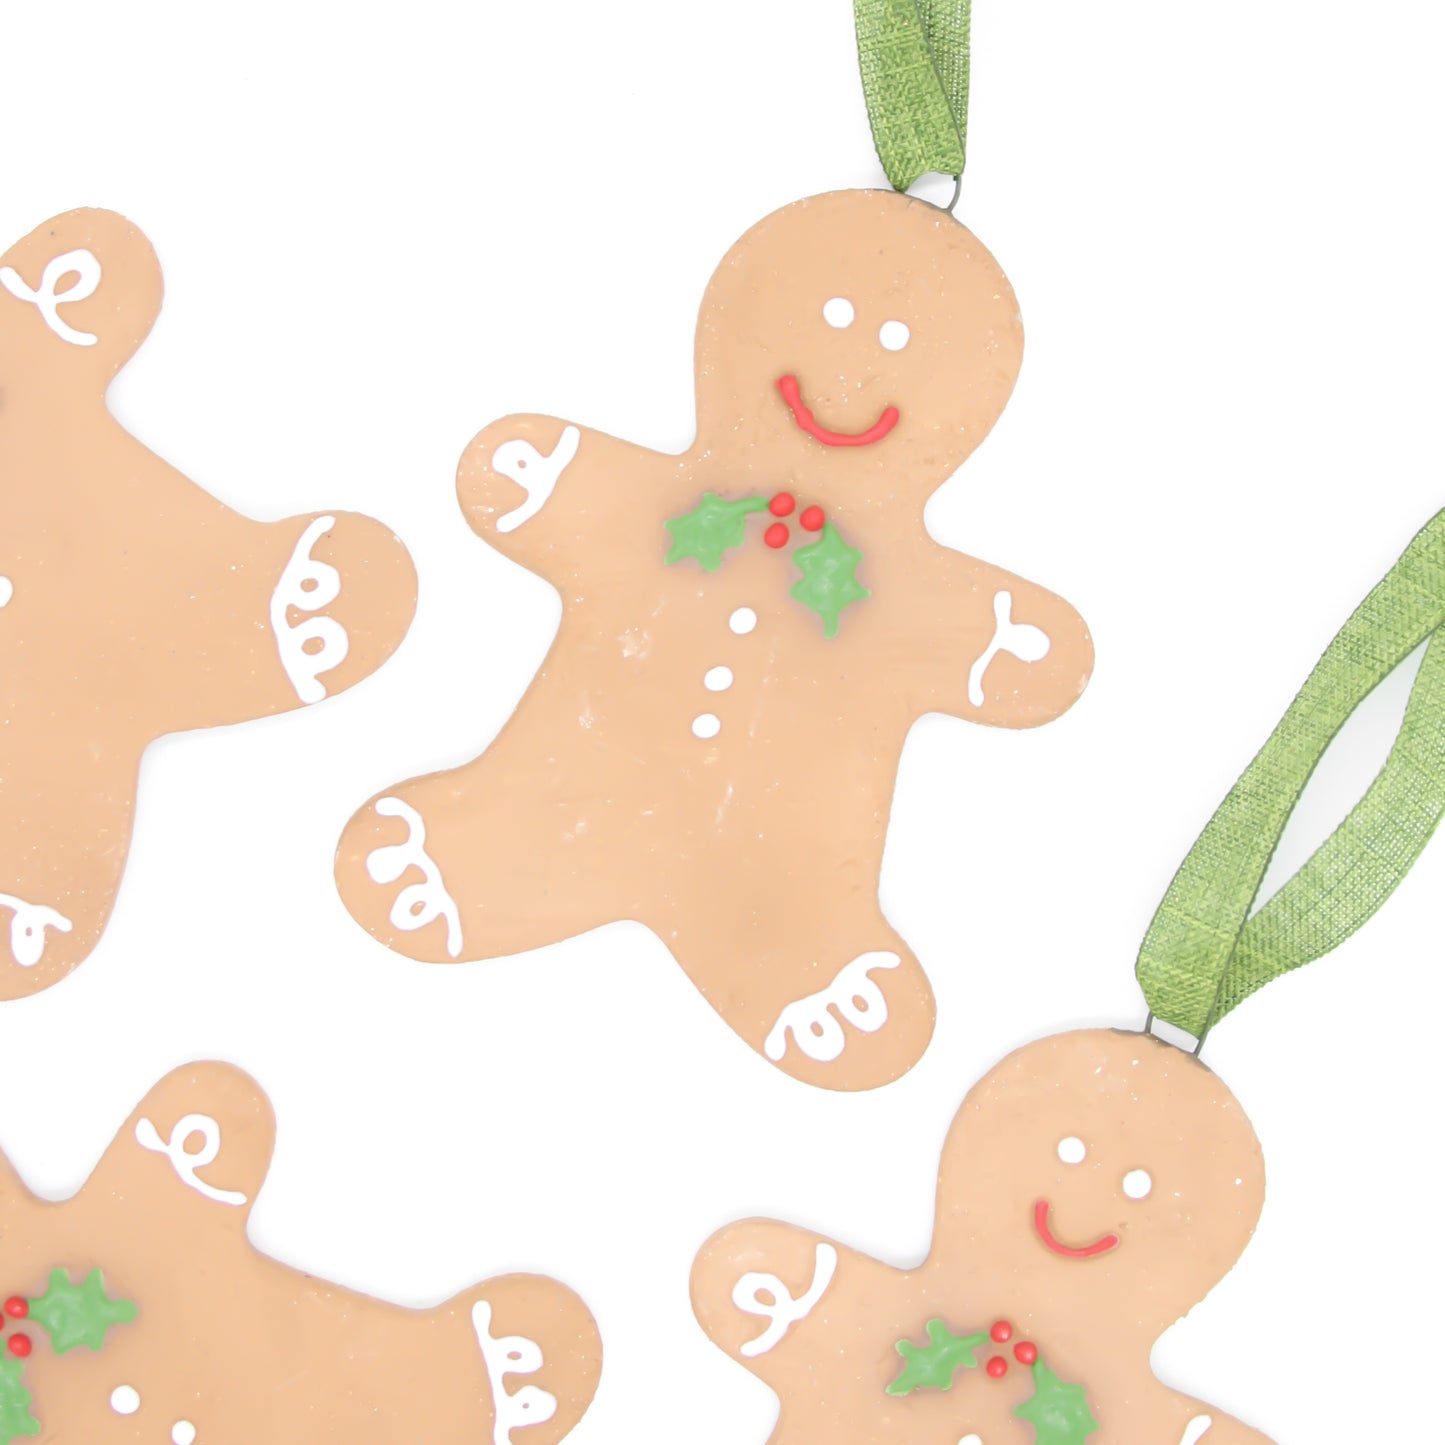 Large Stoneware Gingerbread People Ornaments